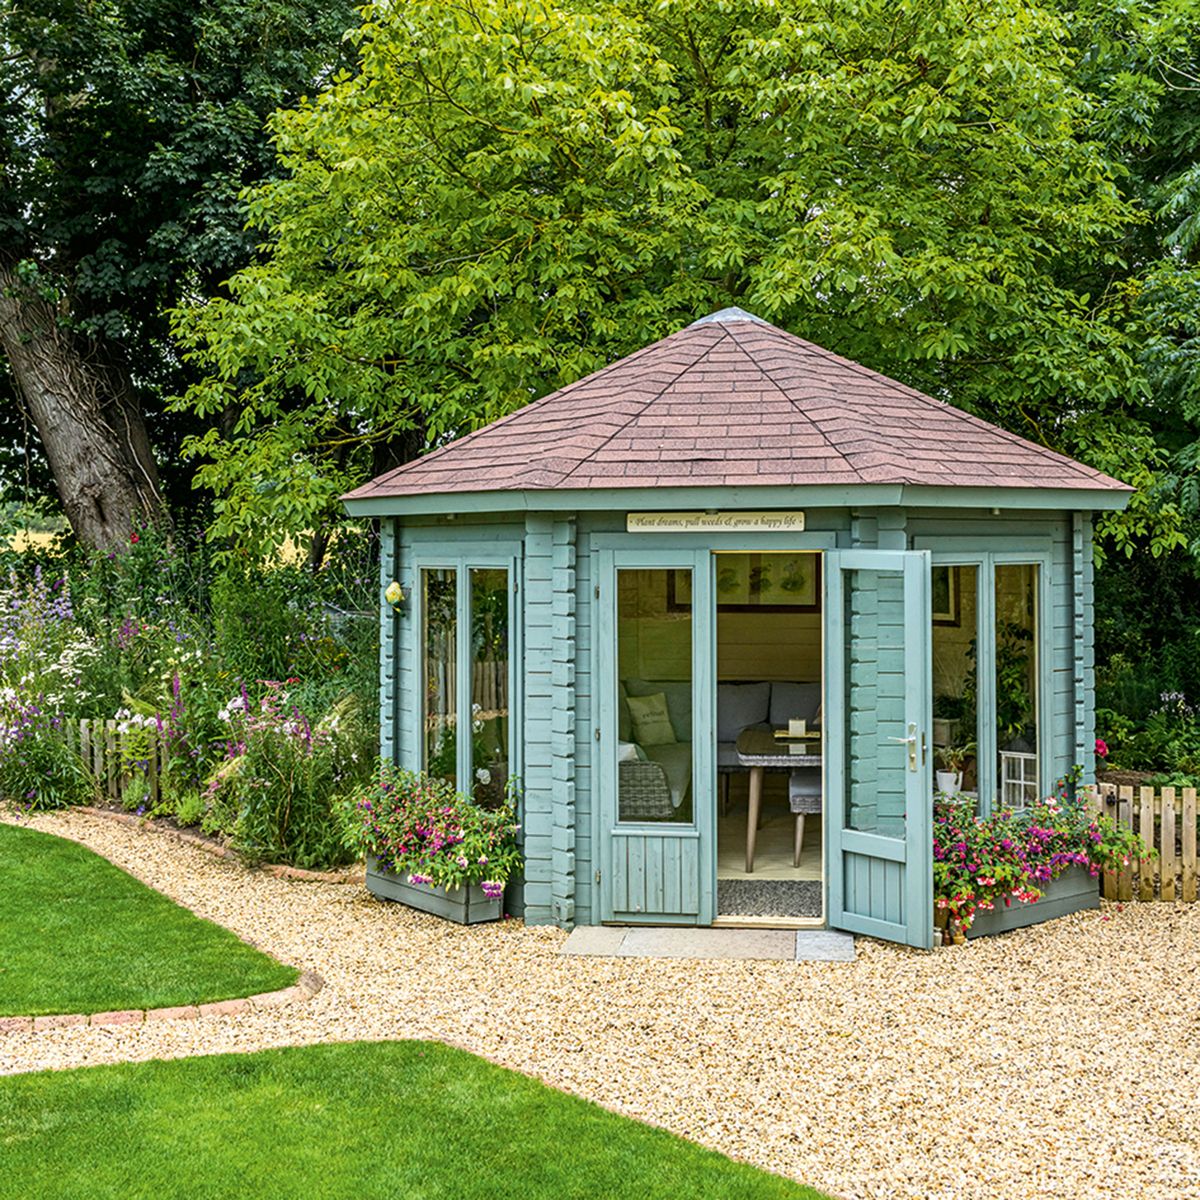 10 Gravel garden ideas for an easy, low-maintenance style